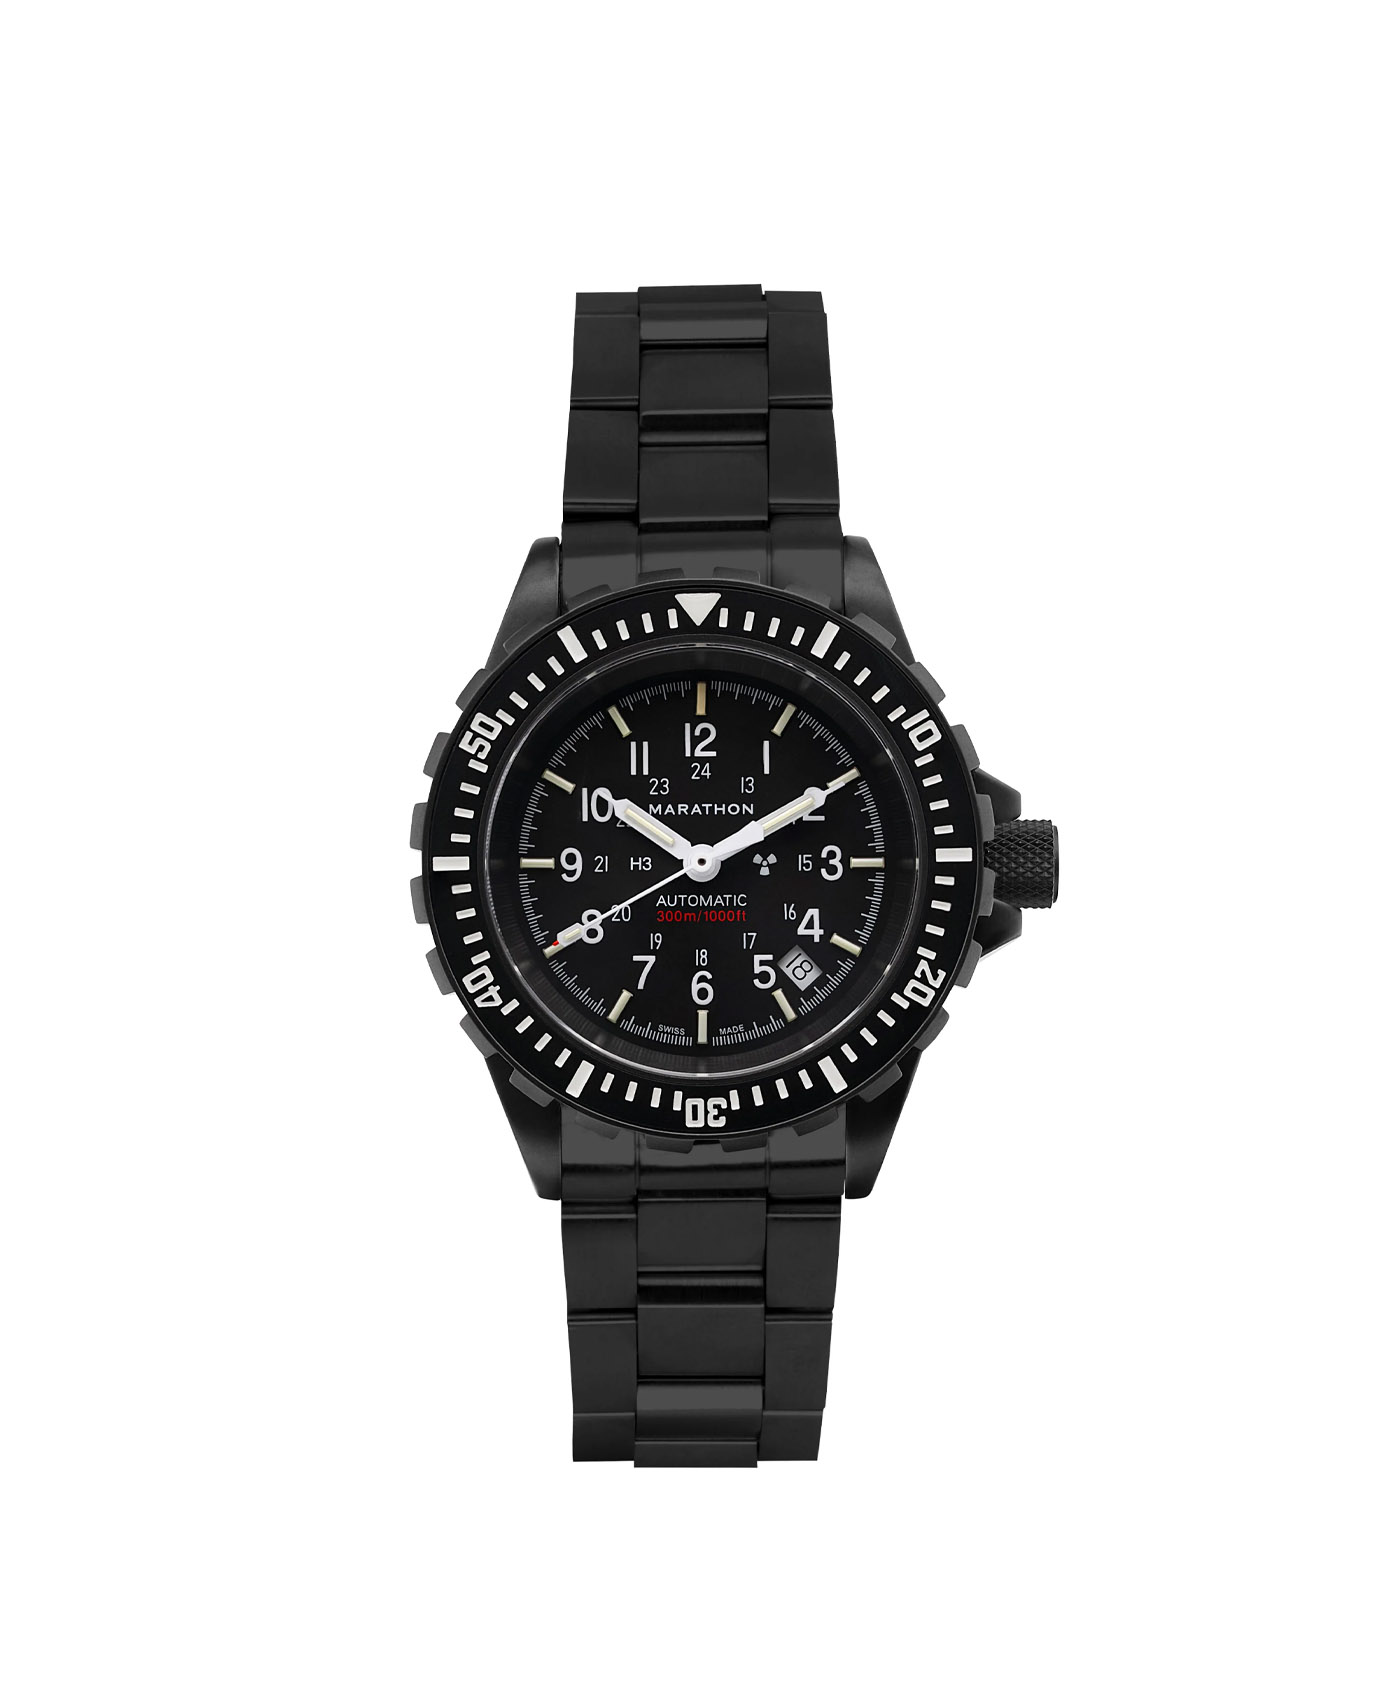 Marathon-41mm-Anthracite-Large-Divers-Automatic-GSAR-With-Stainless-Steel-Bracelet